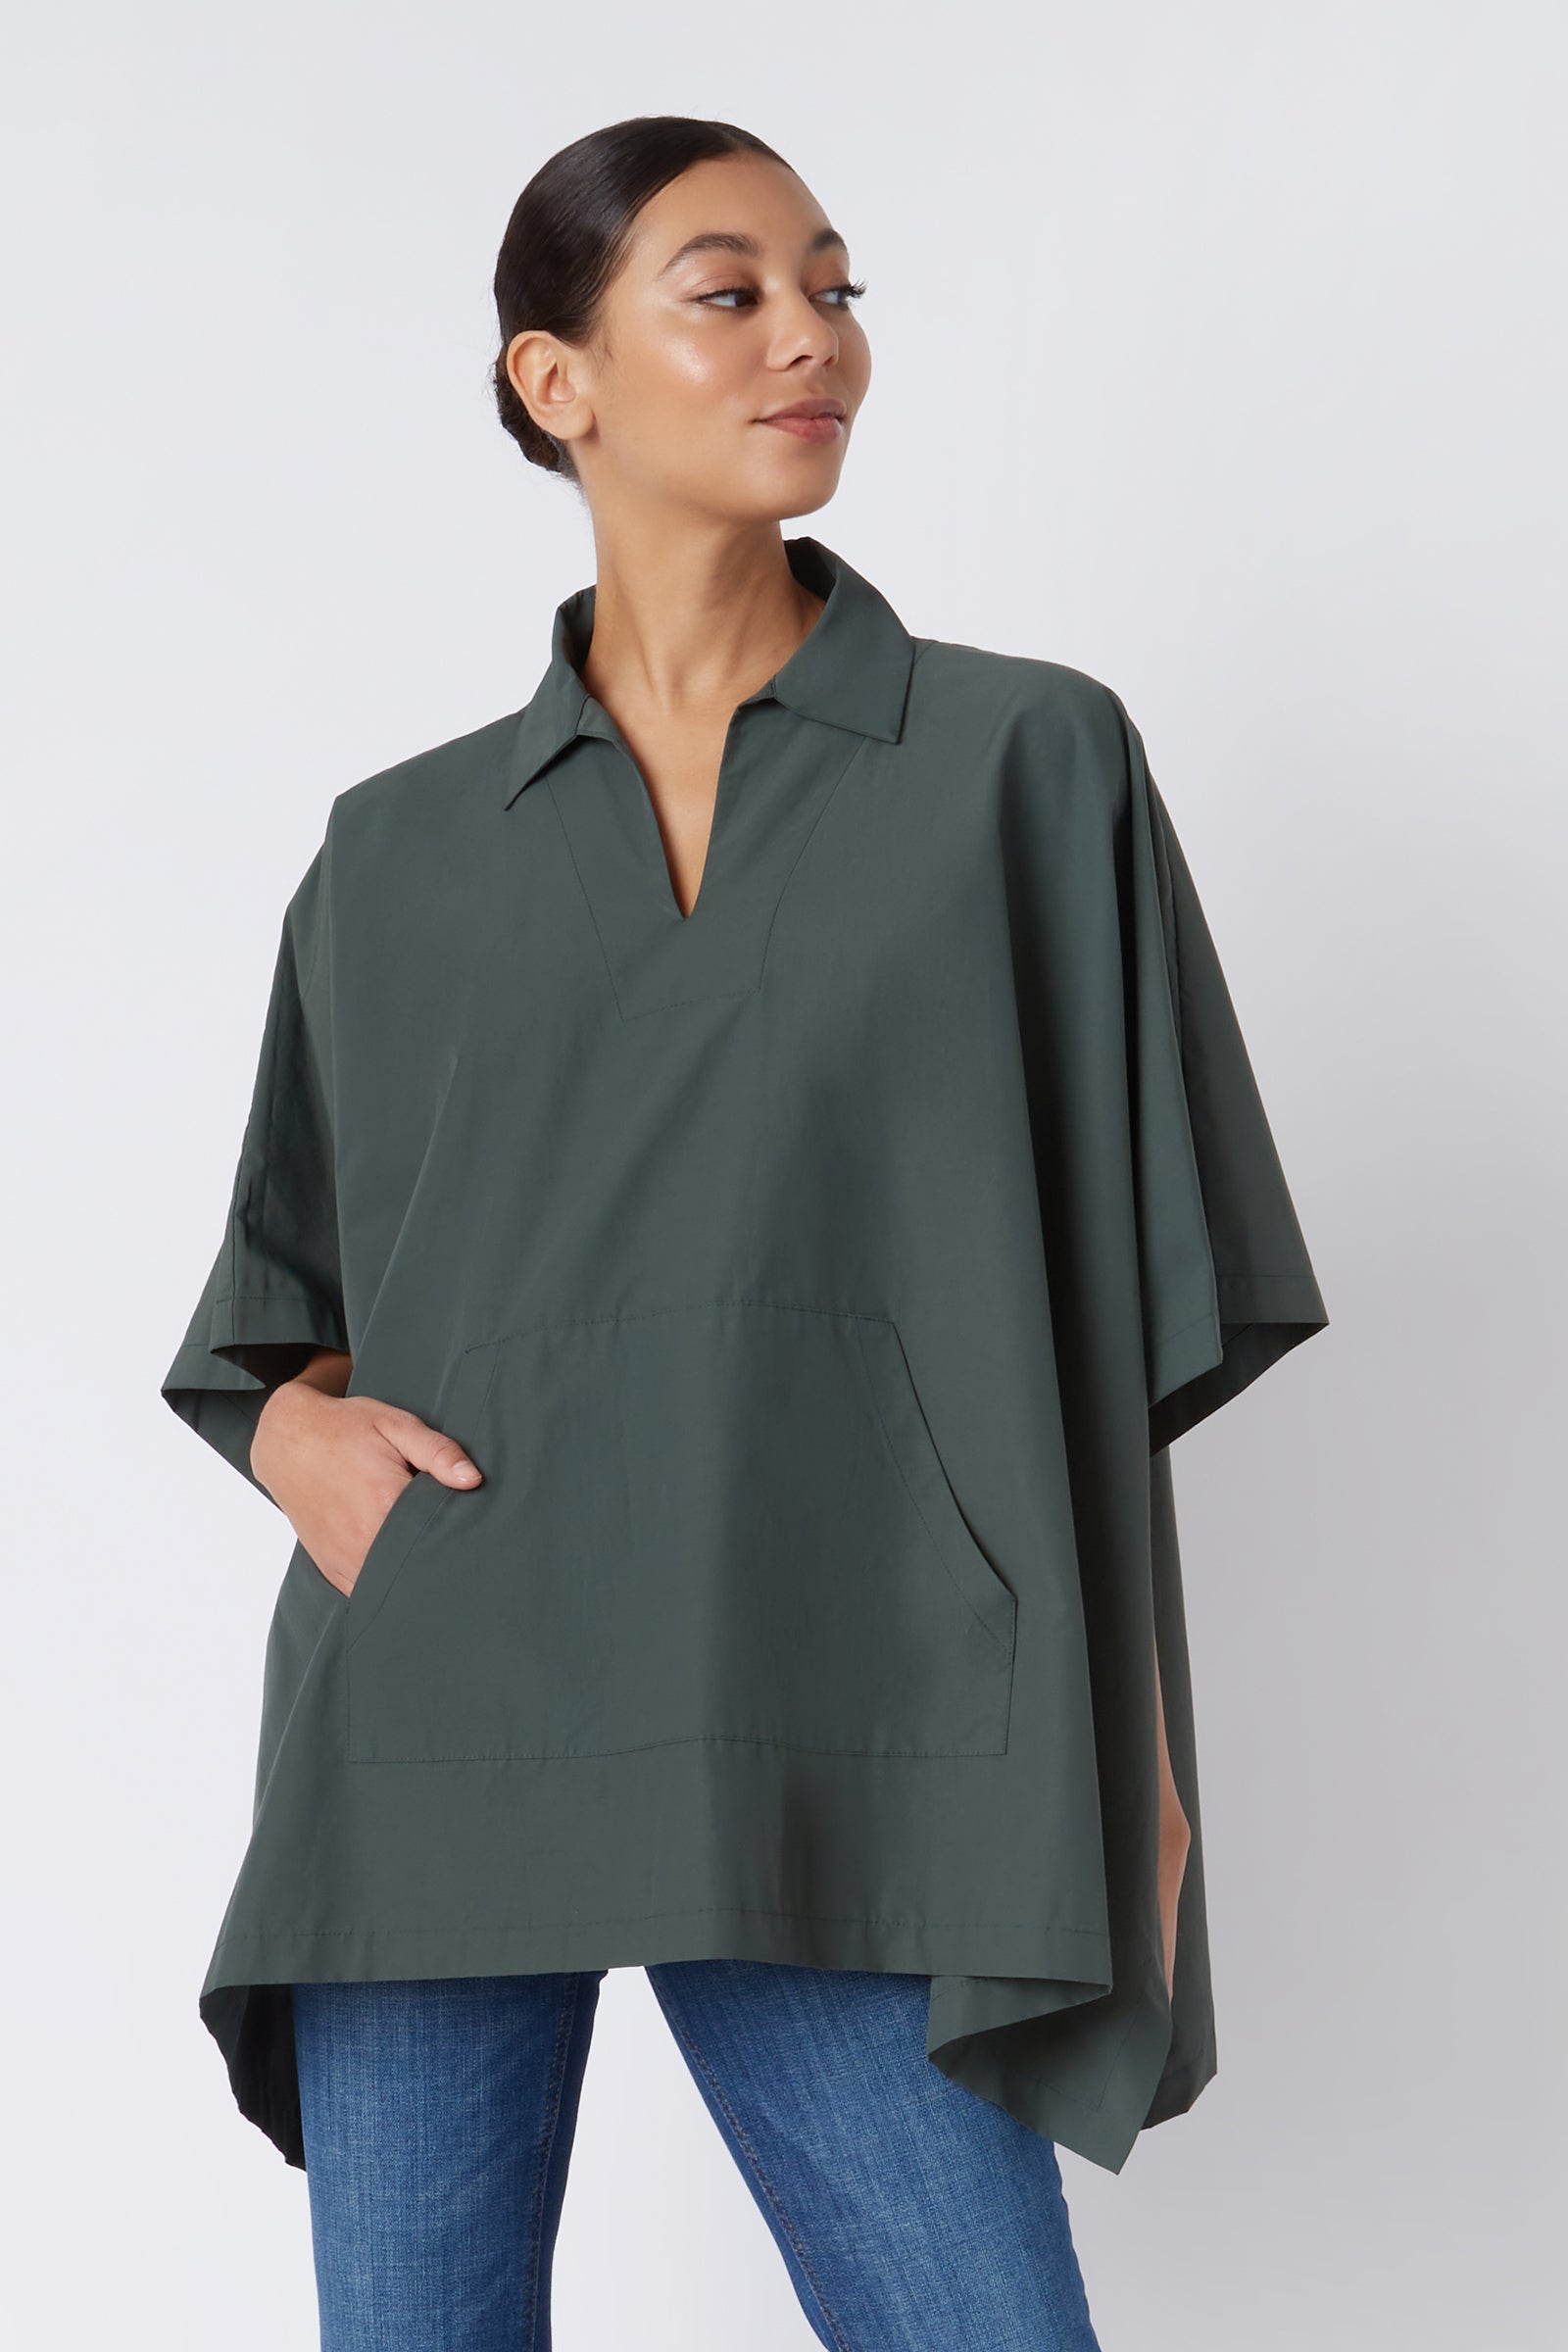 Kal Rieman Pocket Poncho in Loden on Model with Hand in Pocket Cropped Front View